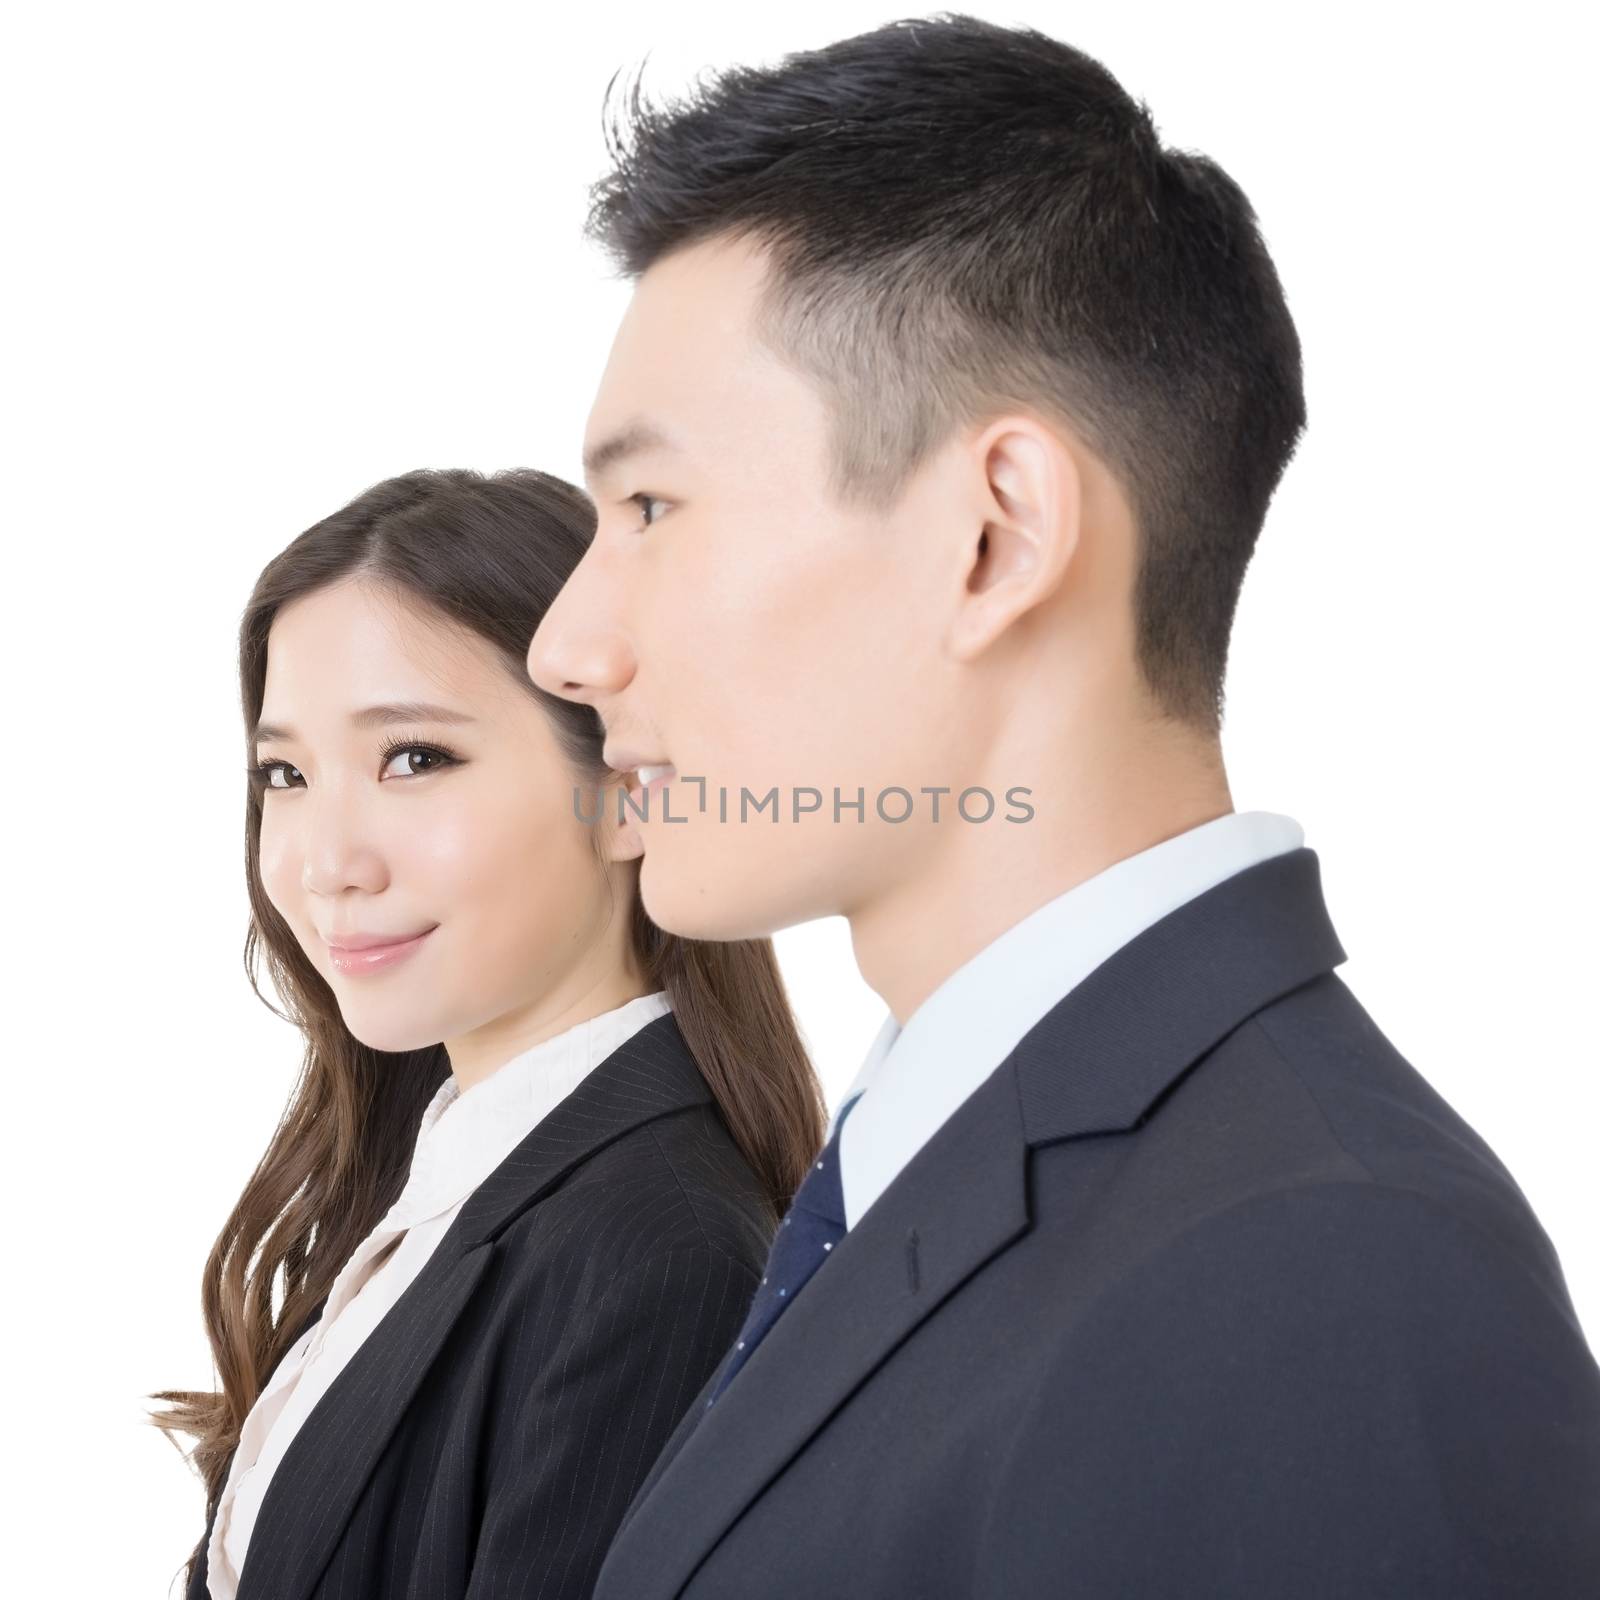 Side view of businessman and woman, close up portrait on white background.